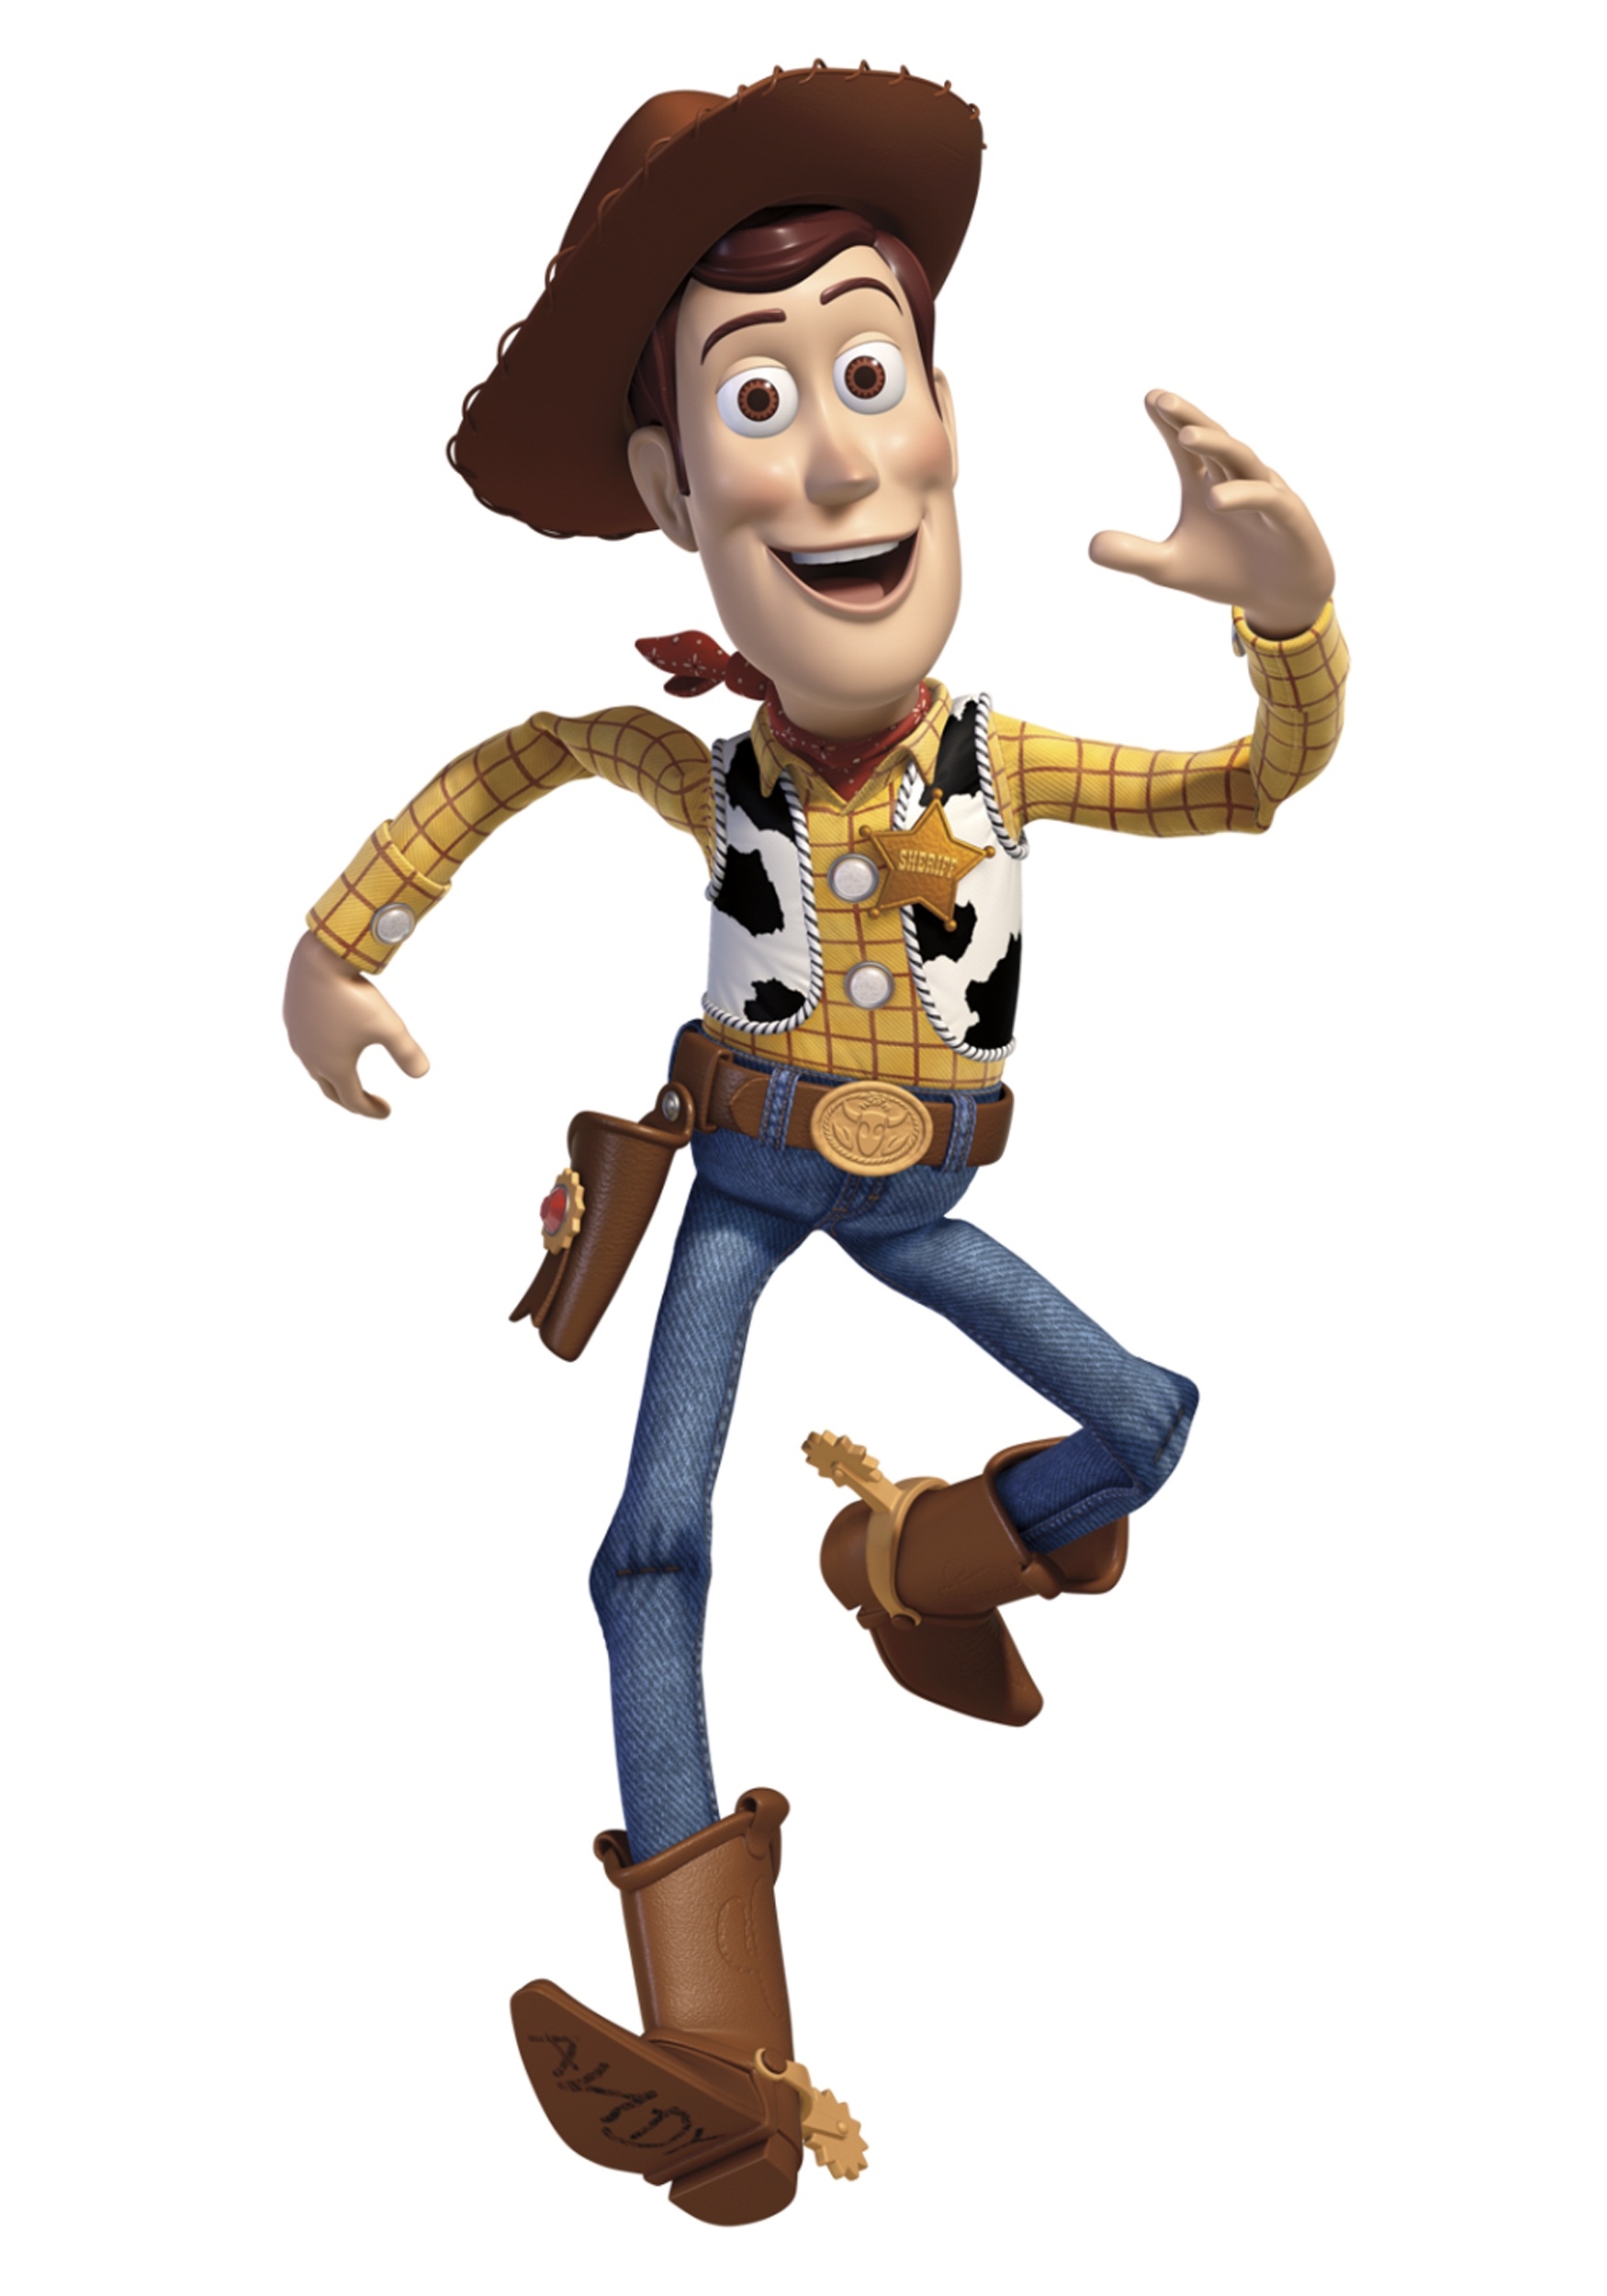 Toystory 1 2 3 Woody Wallpaper Background